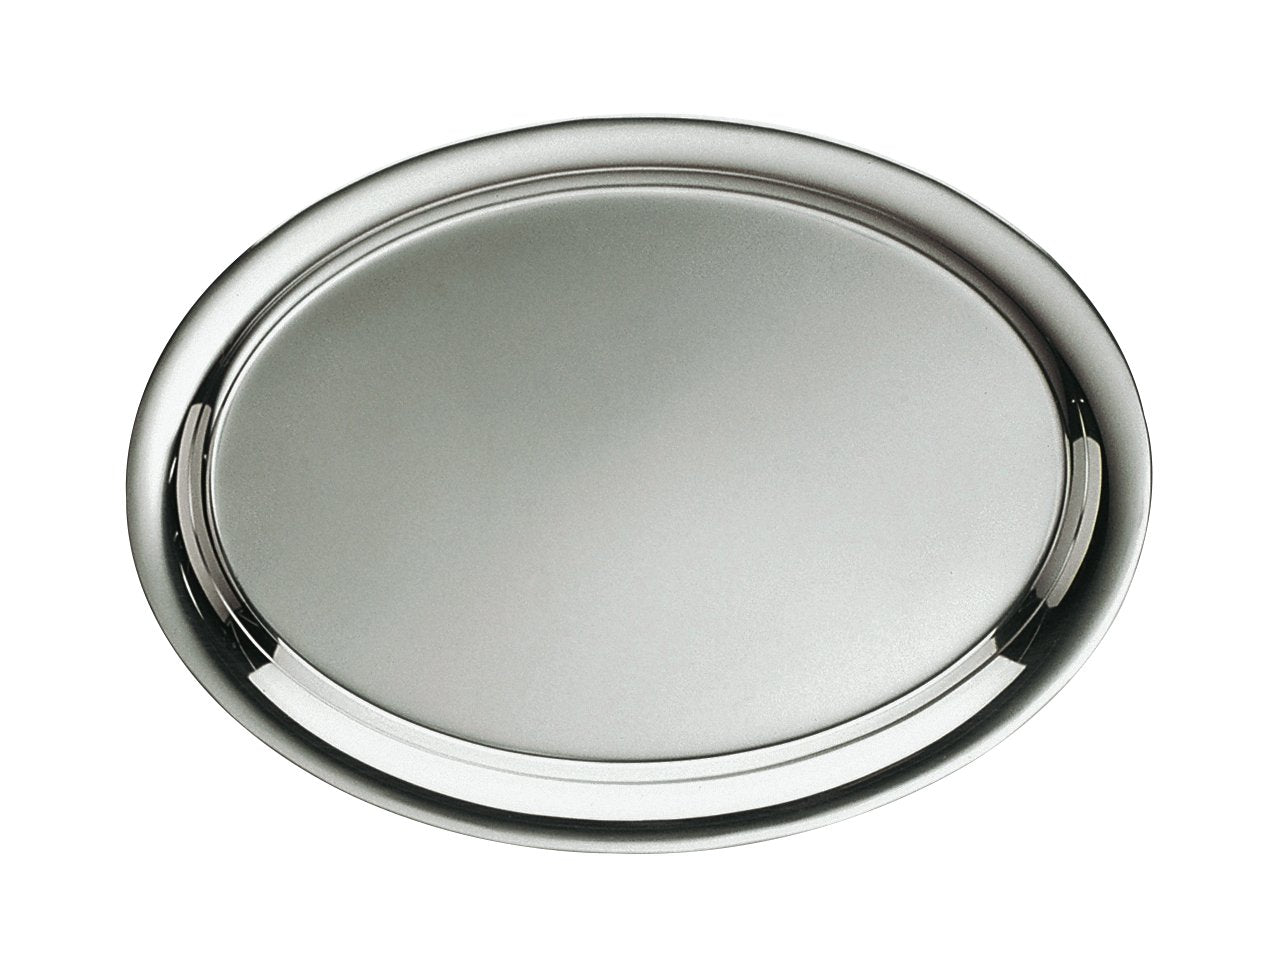 Serving tray, oval, 32,3 x 24 cm